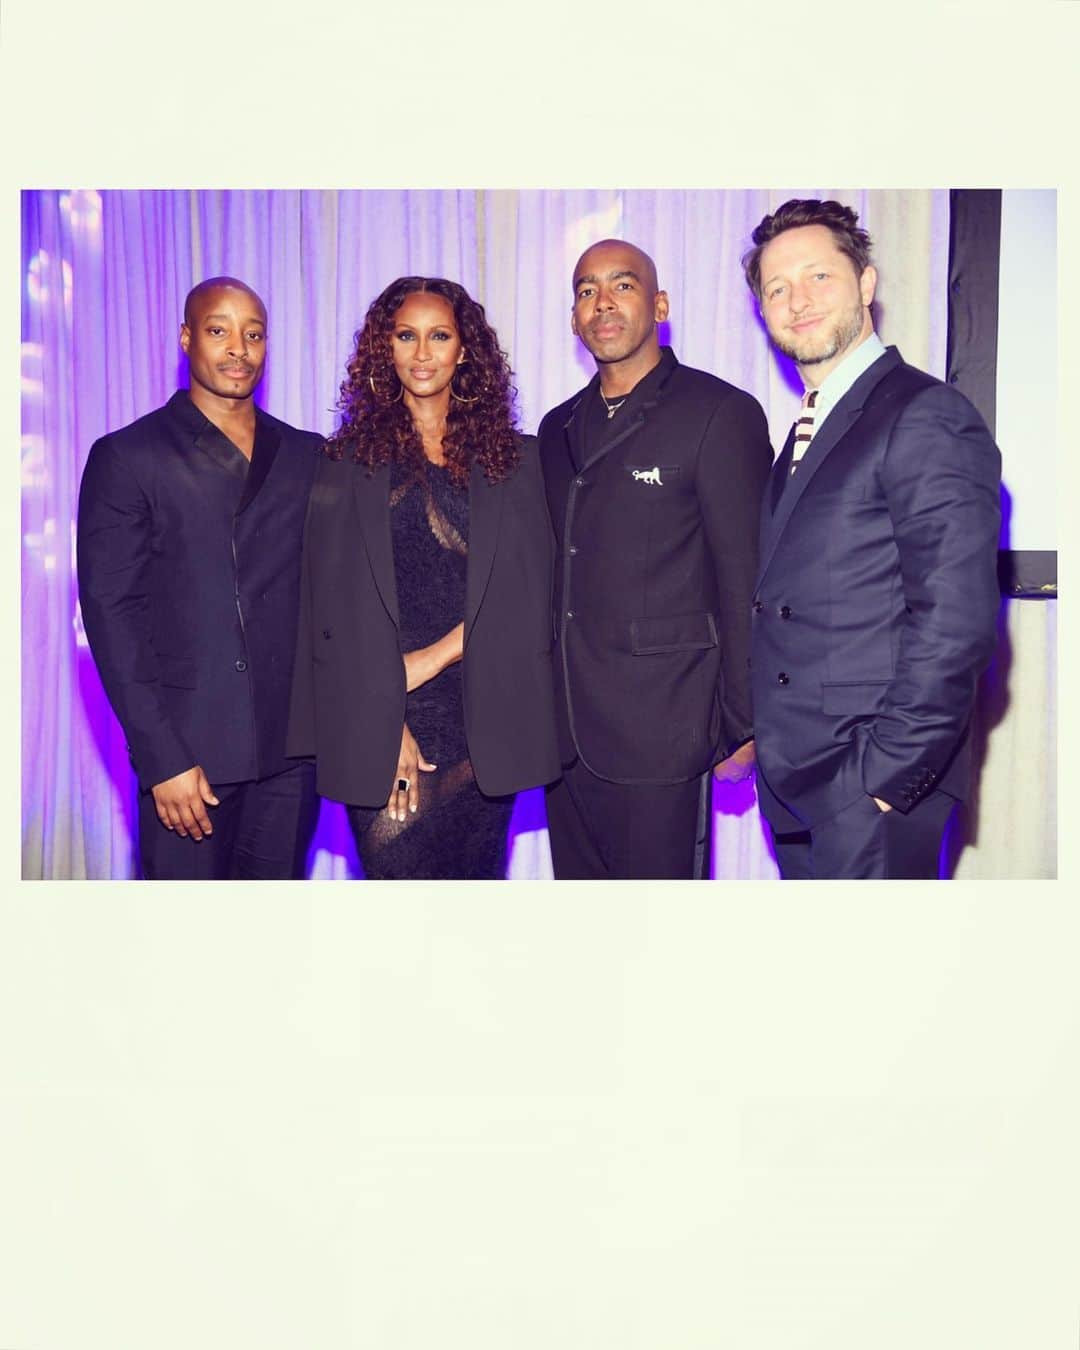 デレク・ブラスバーグのインスタグラム：「The short caption: TAKE IT LIKE IMAN! Thrilled and humbled to be honored by @housingworks alongside the iconic @the_real_iman @jasonbolden and @adair_curtis at this year's Groundbreaker Awards, and extra grateful to @siennathing for presenting me the gong 🏠❤️🏆  The long caption: Growing up in St. Louis, I didn’t know any gay people. Now I joke that the only out people my family knew when I was young were Elton John and Liberace. In the 90s, the AIDS crisis felt a scary, looming obstacle in a community I knew I was secretly a part of. So I was scared to grow up and come out. But! When I got to New York in 2000, I was relieved to discover organizations like Housing Works, which display the power of chosen families and support systems. I saw the LGBTQ+ community take care of their elderly, especially when they had nowhere else to turn. It was incredible. It filled me with pride.   Housing Works was founded in 1990 by people who were dedicated to serving the tens of thousands of homeless men, women and children living with HIV and AIDS. In the past three decades, they’ve worked with more than 150,000 (!) people in this community. Today, they run more than 700 units of supportive housing, more than any similar provider in the nation. Their tireless work is now helping to bring an end to the AIDS epidemic and fight policies that continue to marginalize communities at risk.   Last week, they honored me with a Groundbreaker Award, which made me nostalgic for the 23 years I've lived in this town. I've gone from a Housing Works shopper to an honoree, from being a bright eyed kid in this big city to being a proud gay father with kids I hope will become the sort of New Yorkers that build and support Housing Works's missions. (In her introduction, Sienna Miller also reminded me we met as wild teenagers and have somehow turned into wild parents of wild kids of our own.) Thank you to the many incredible people at Housing Works and Design on a Dime that work tirelessly on behalf of the LGBTQ+ community. Your work is incredible and honorable, and I salute you. And thanks to my mom and dad for coming out to continually support me. ❤️  📸: Gary Gershoff for Getty」